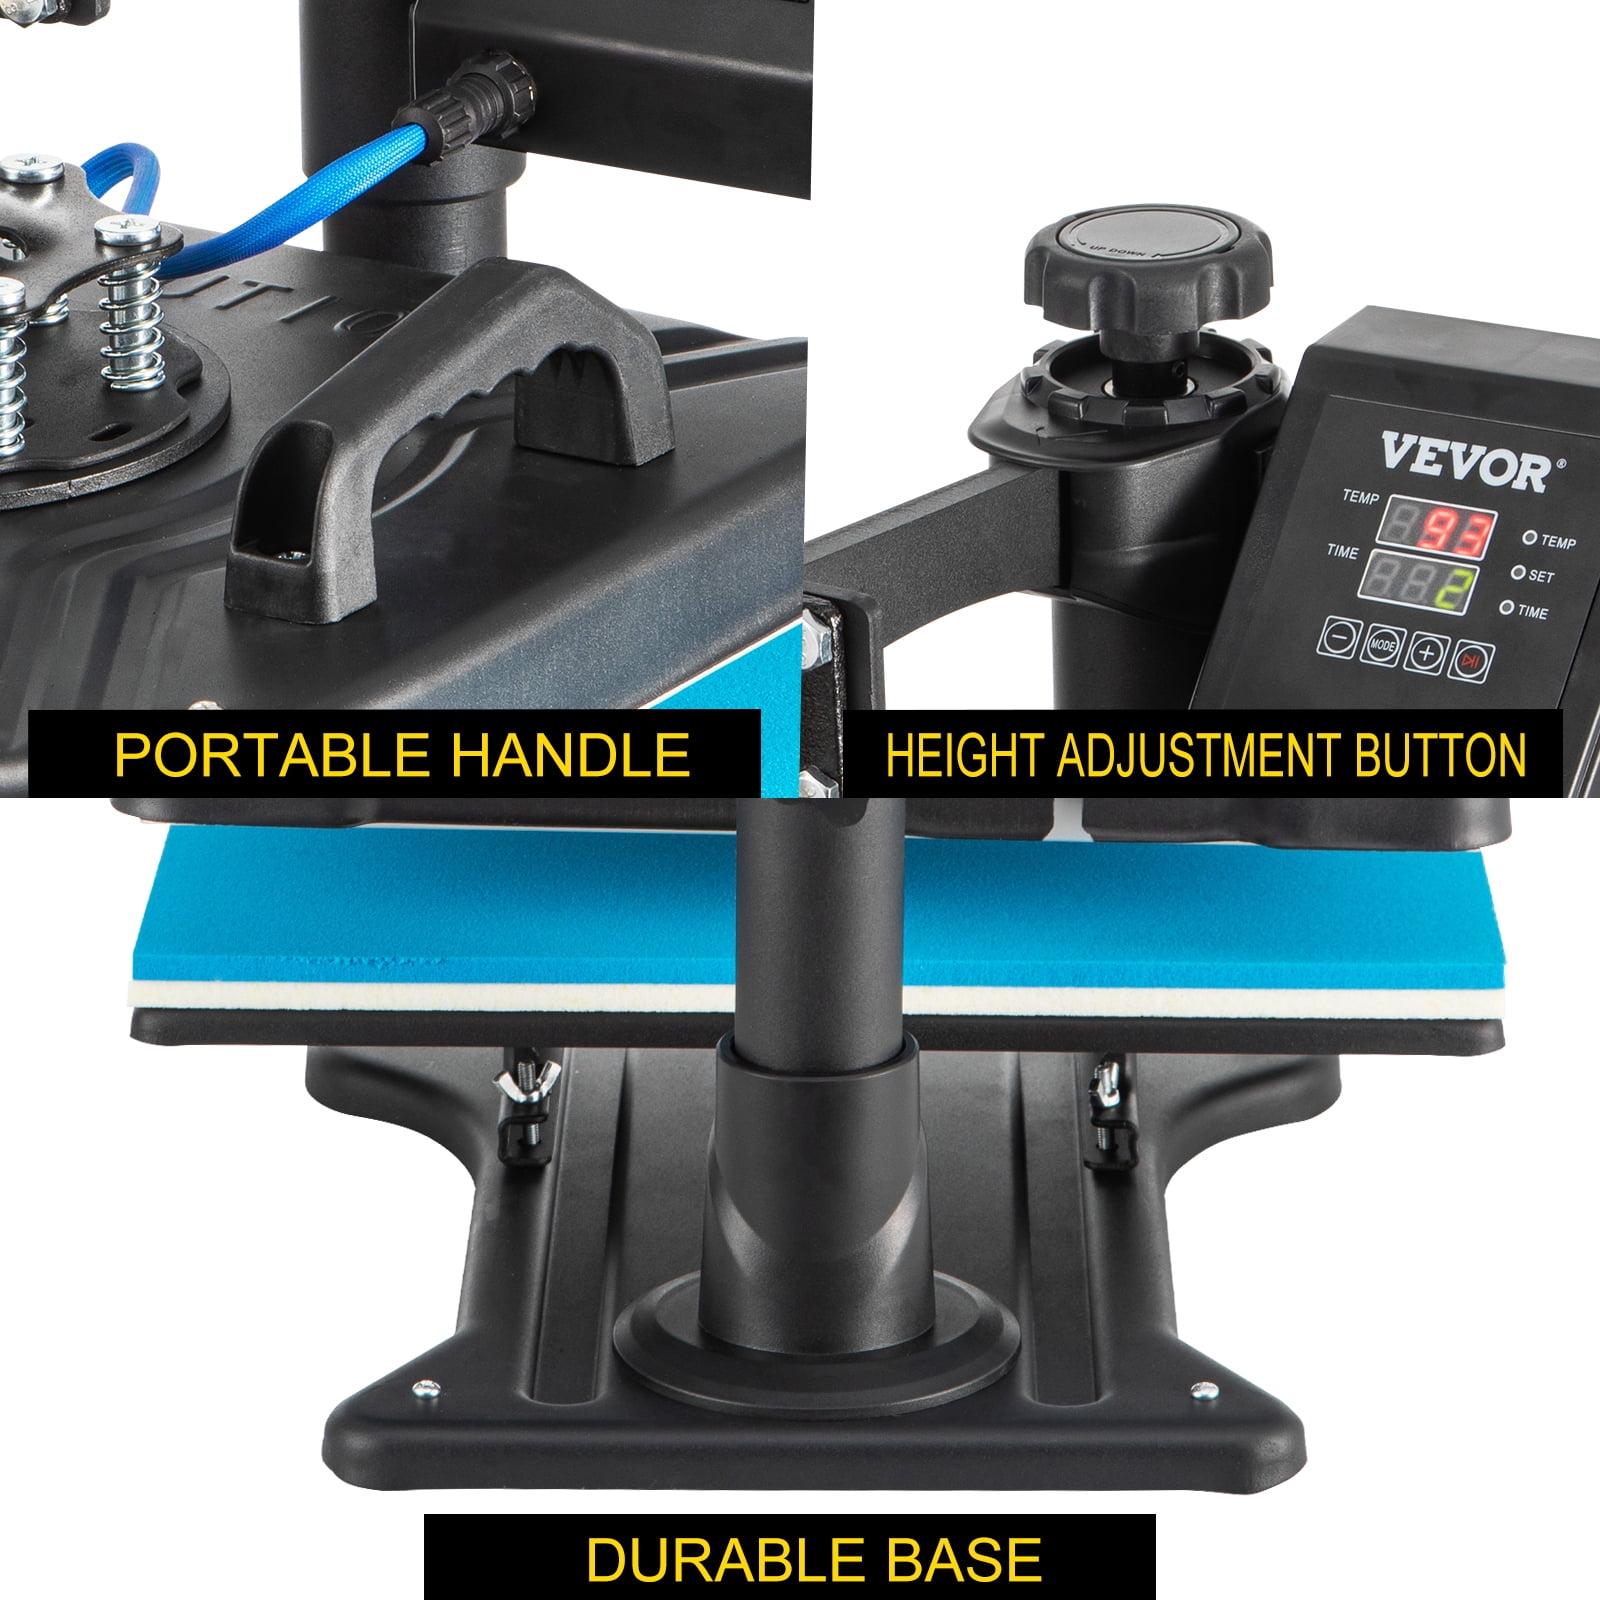 8 in 1 VEVOR Heat Press Review, How To Use The Attachments